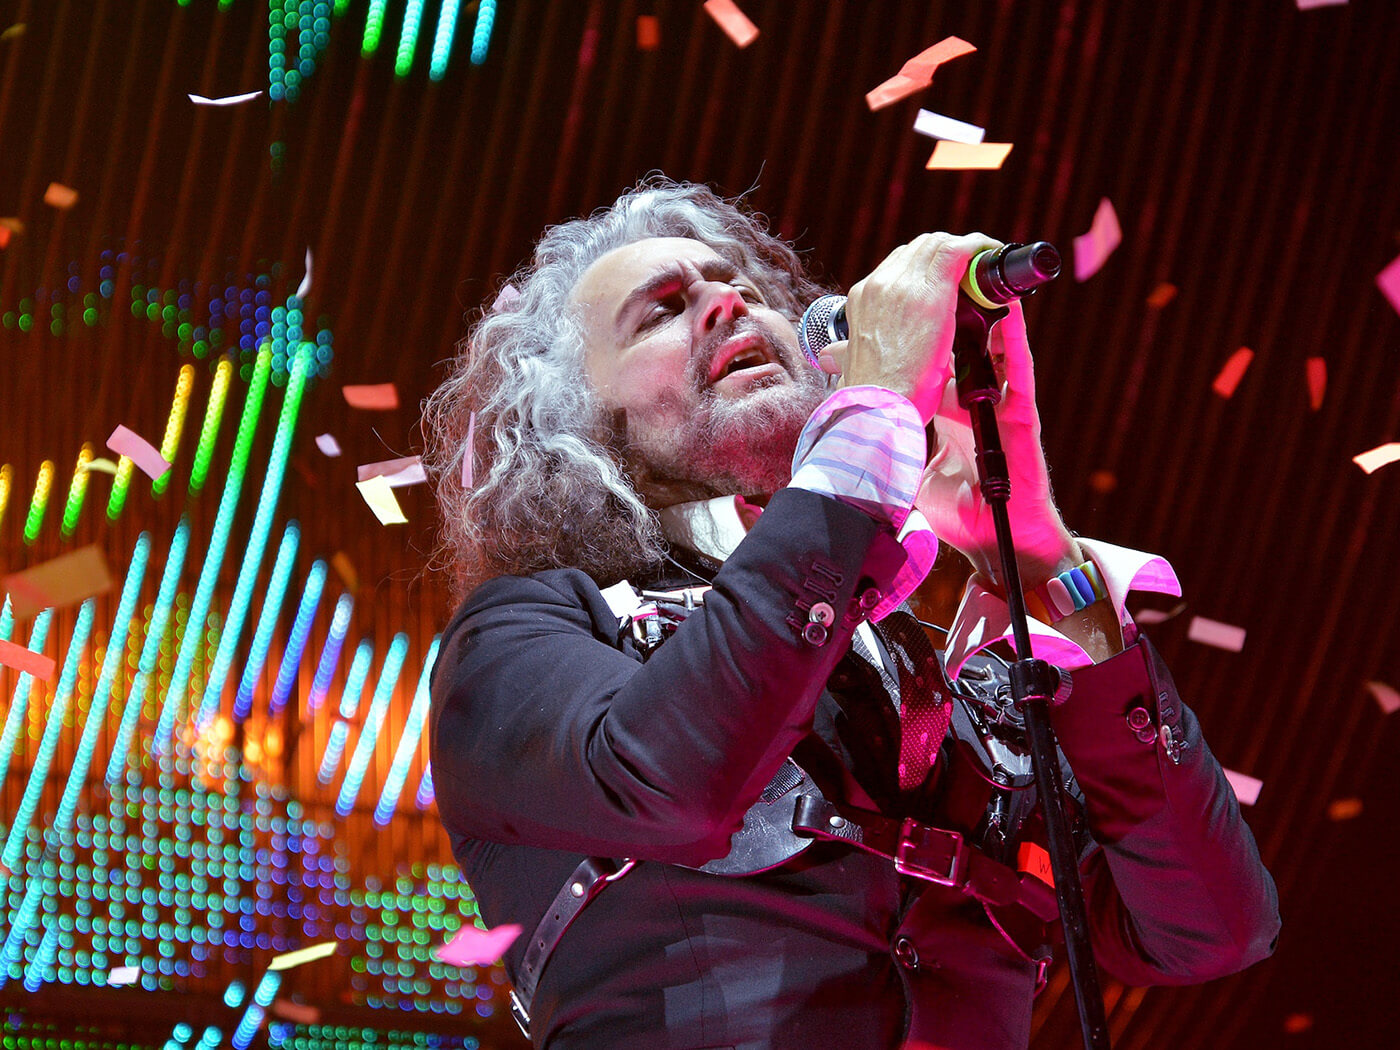 Flaming Lips to perform Yoshimi Battles The Pink Robots in full on UK tour